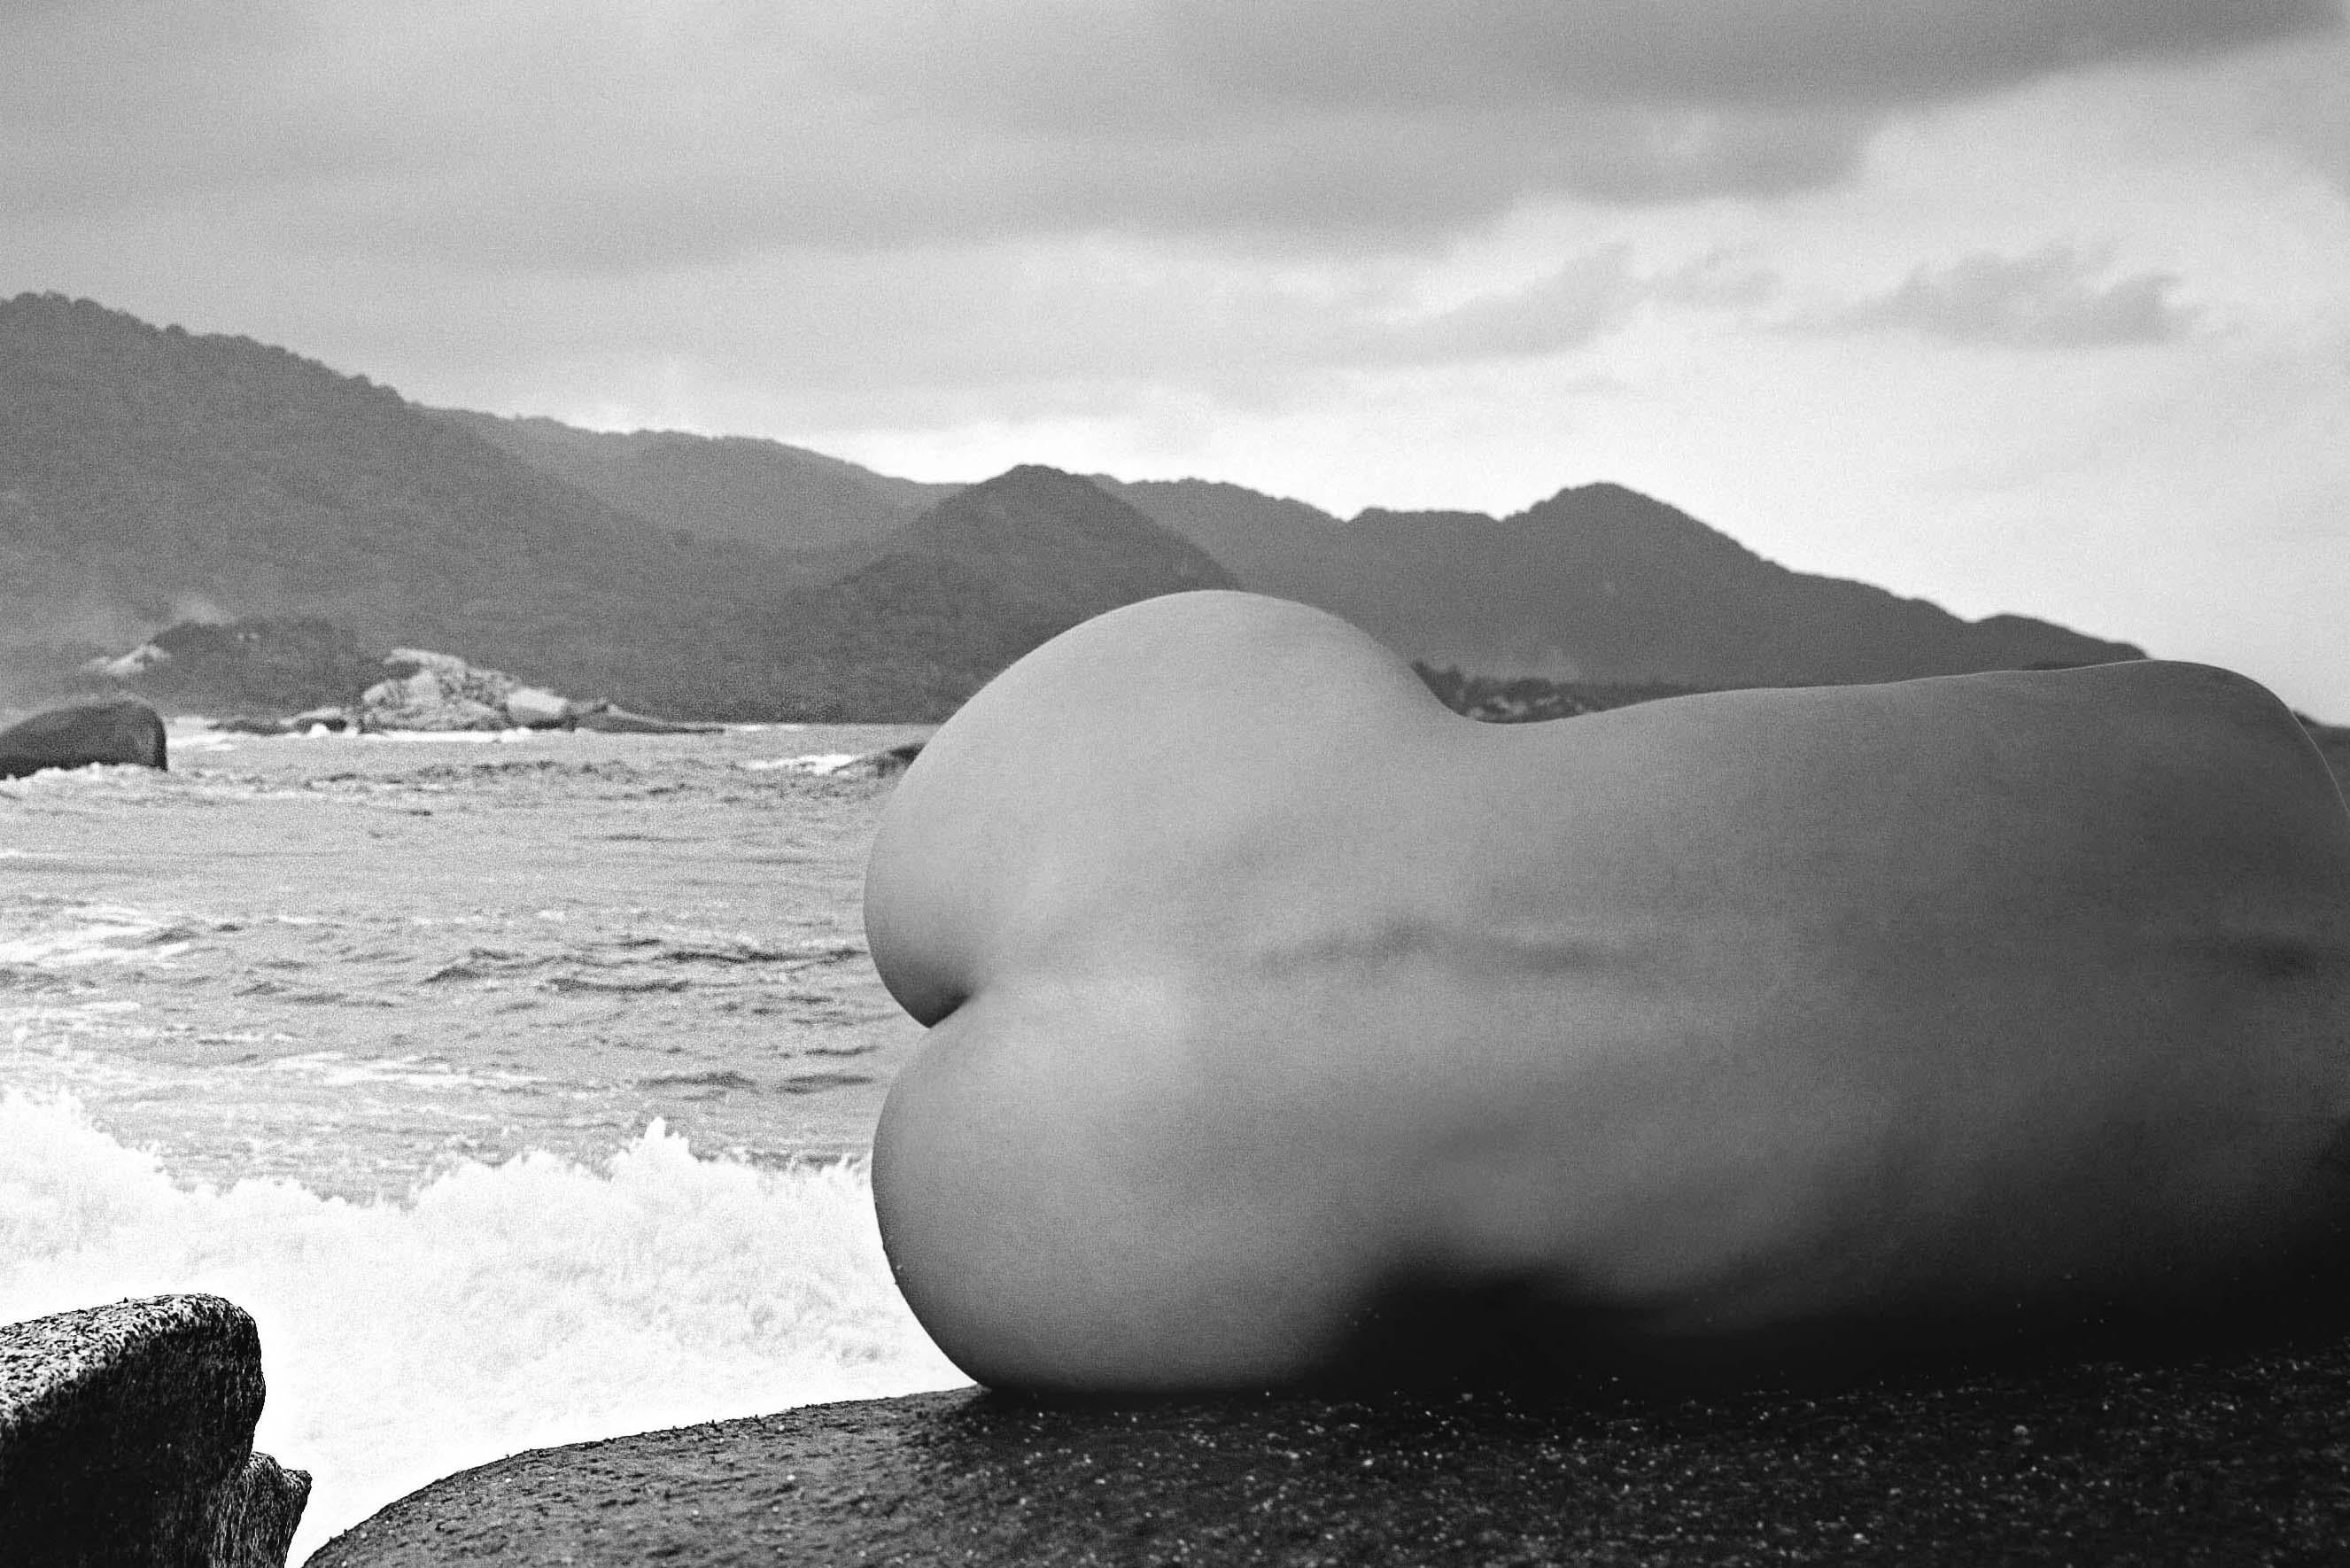 Half Angels Half Demons #14, Nude in a landscape B&W limited edition photograph - Photograph by Mauricio Velez